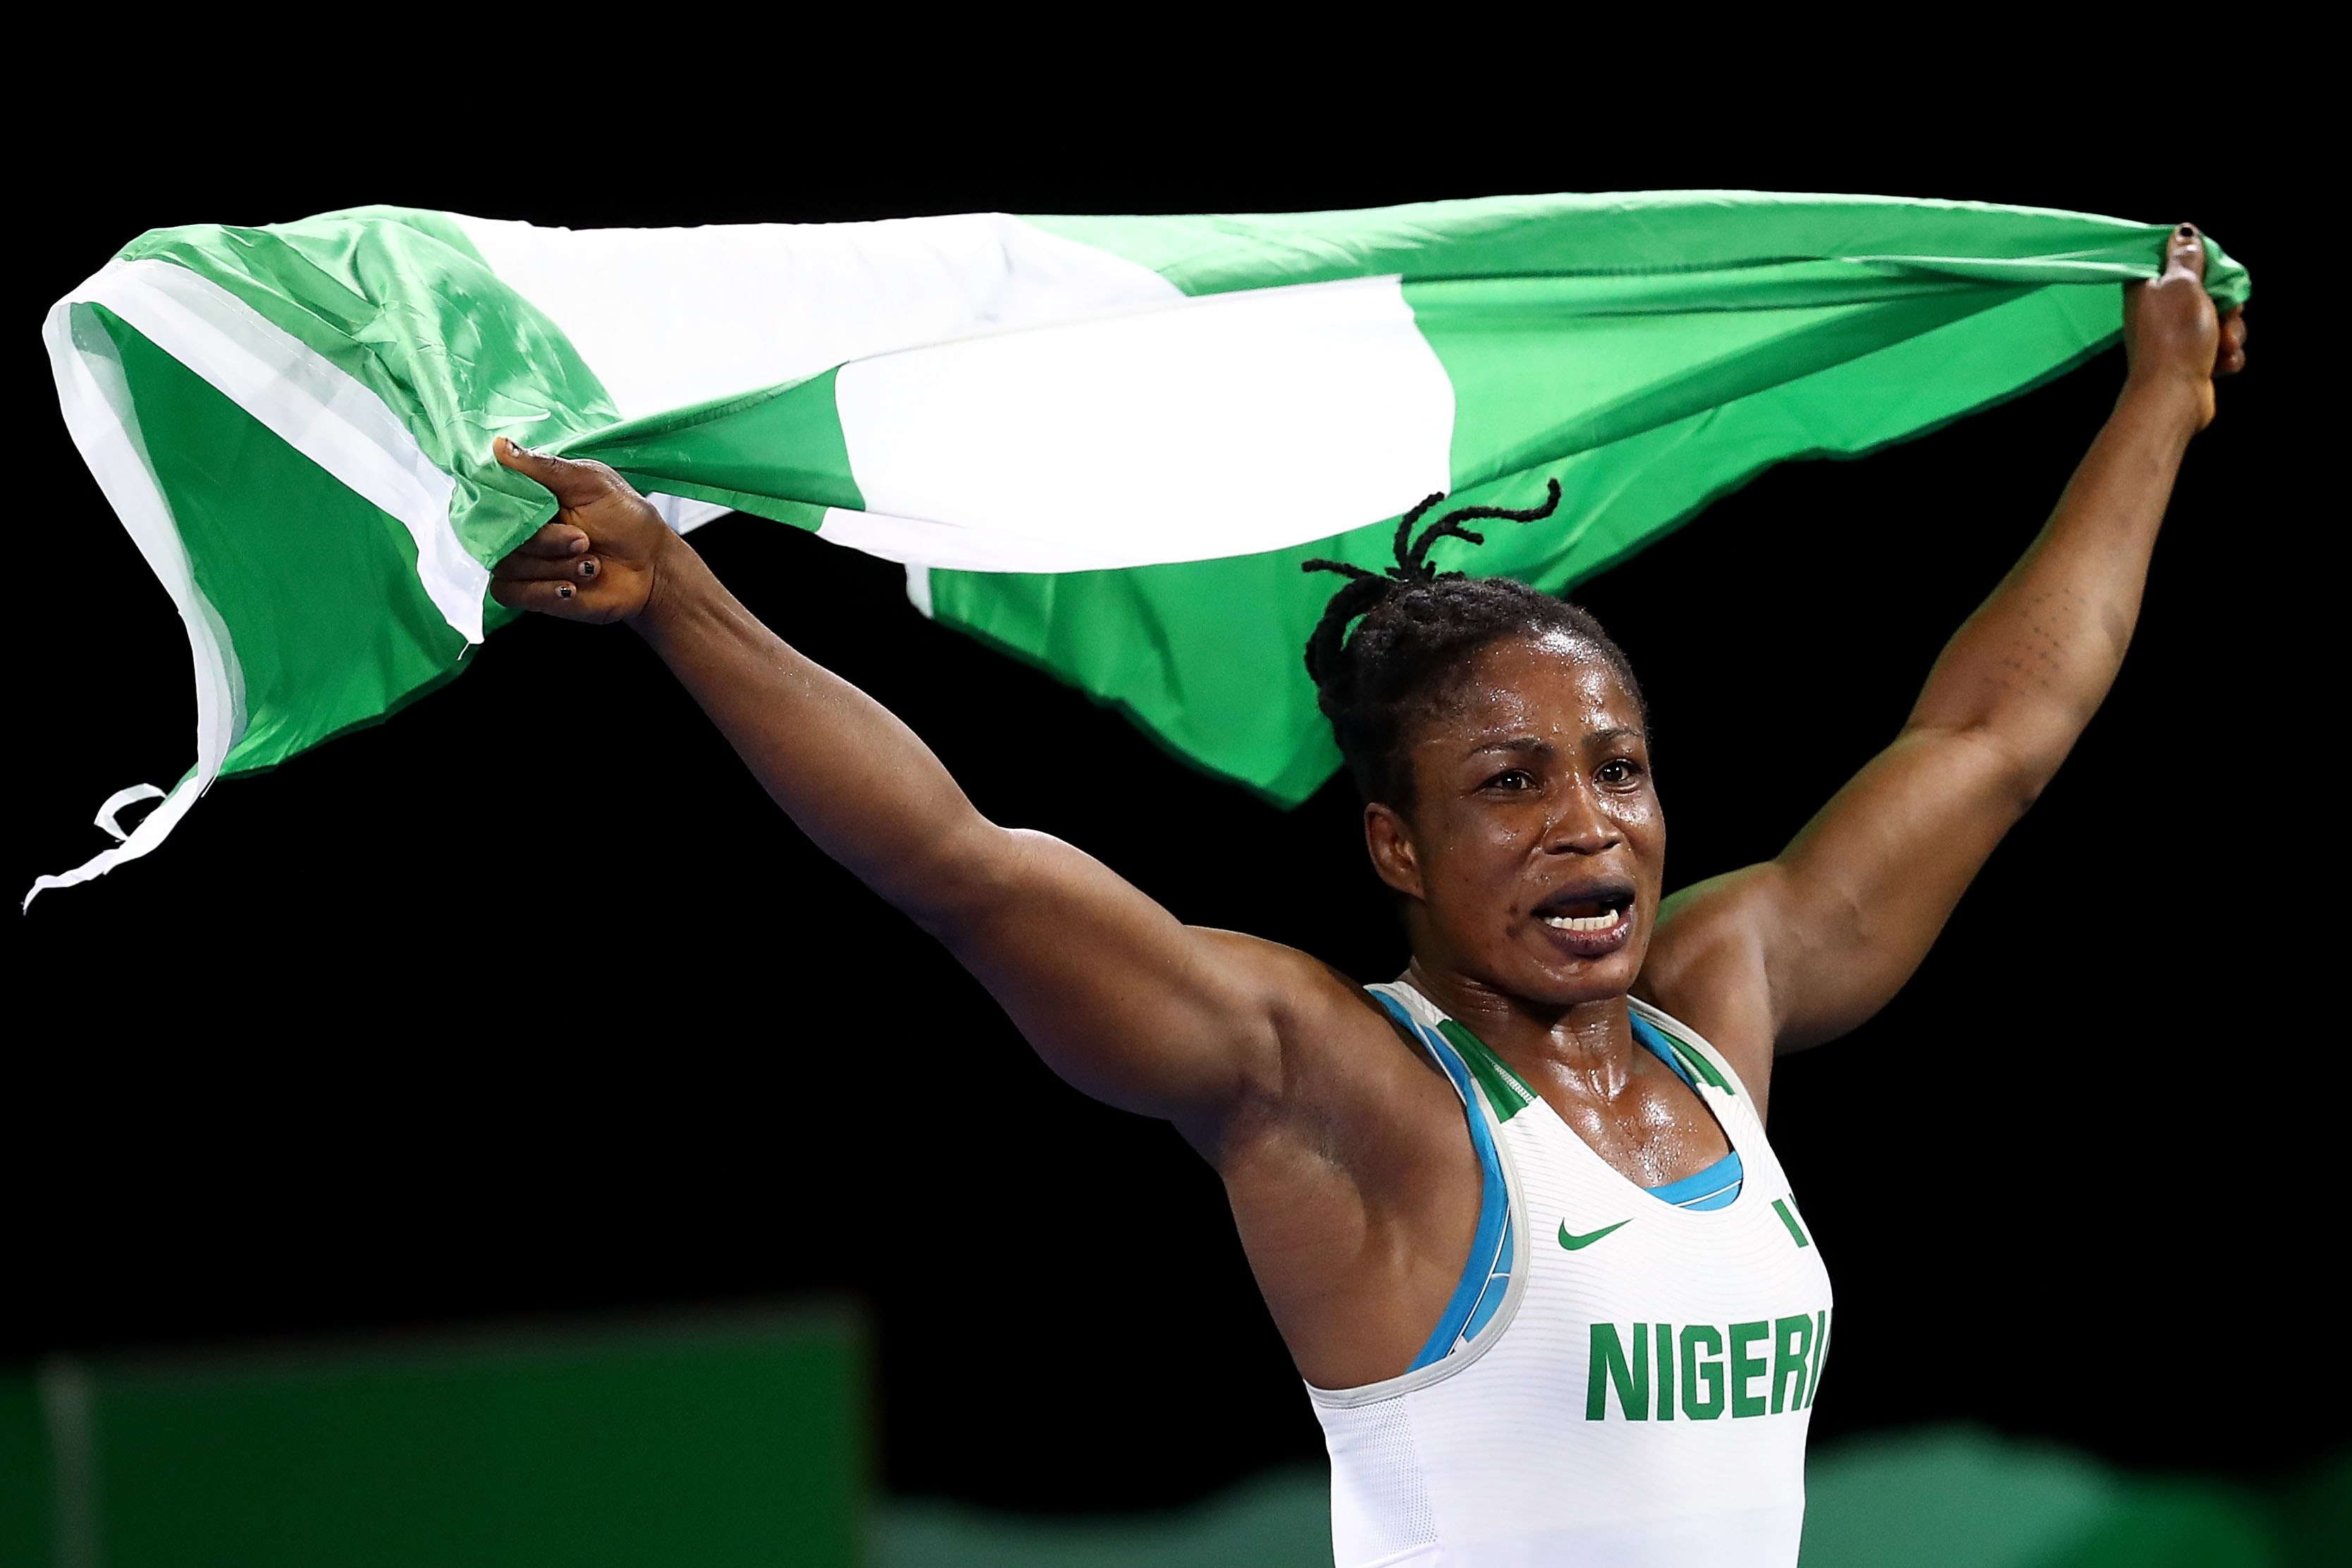 JUST IN: Blessing Oborududu Wins Nigeria’s First Silver Medal At Olympics